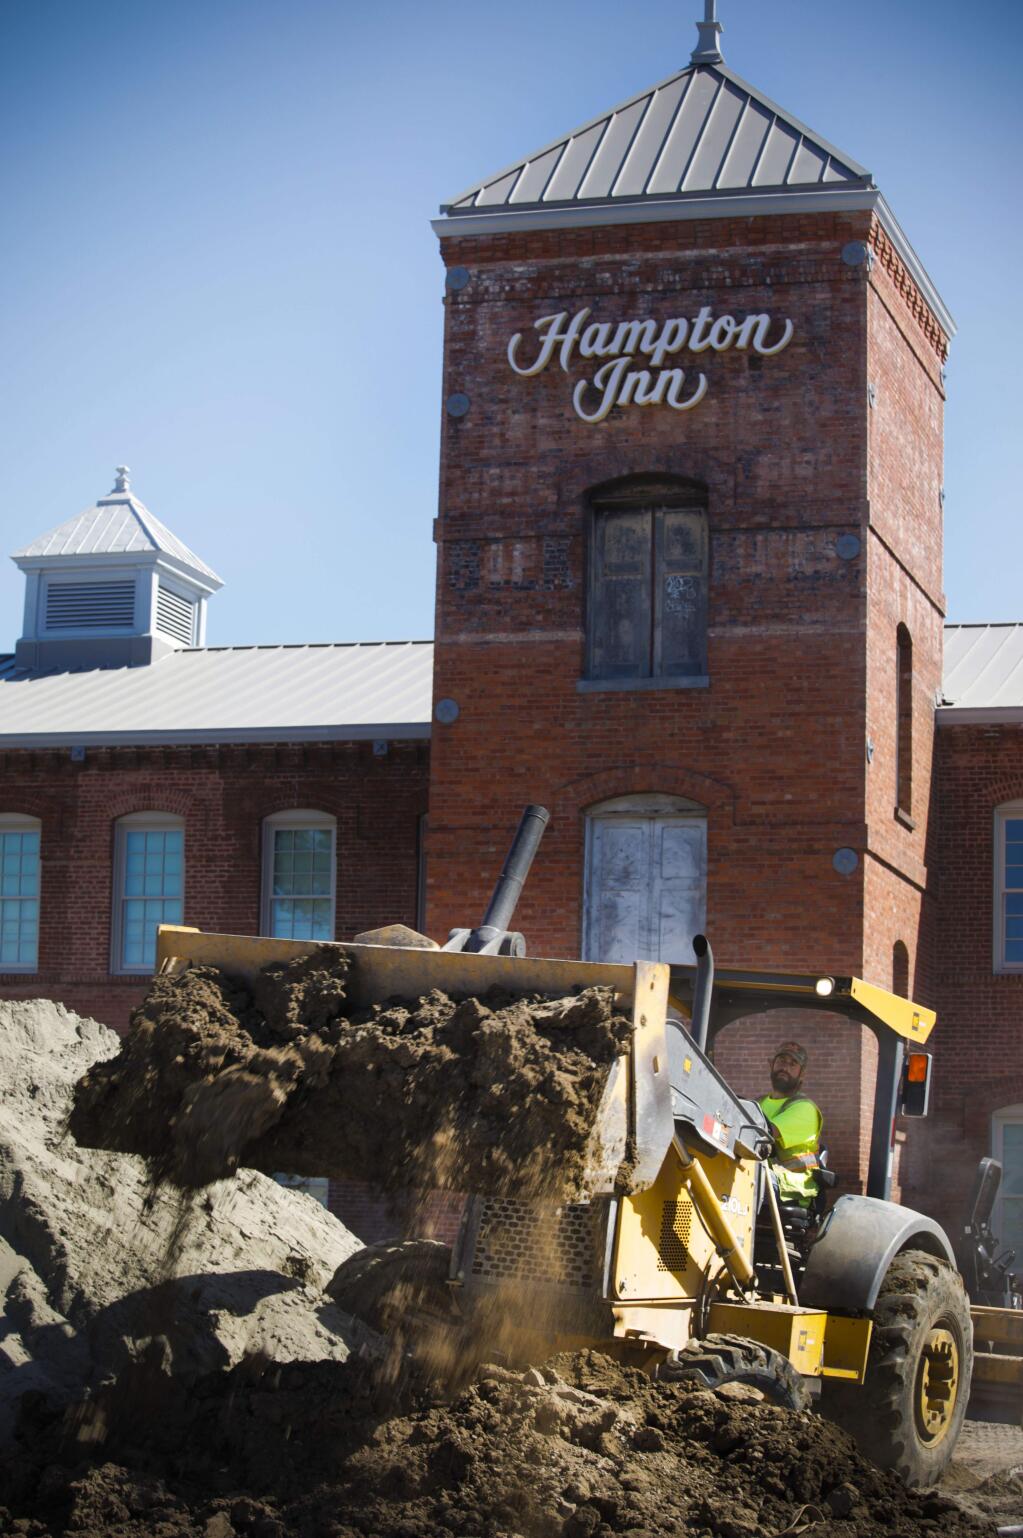 Work continues at the former Silk Mill on Lakeville where a new Hampton Inn is scheduled to open in June(CRISSY PASCUAL/ARGUS-COURIER STAFF)